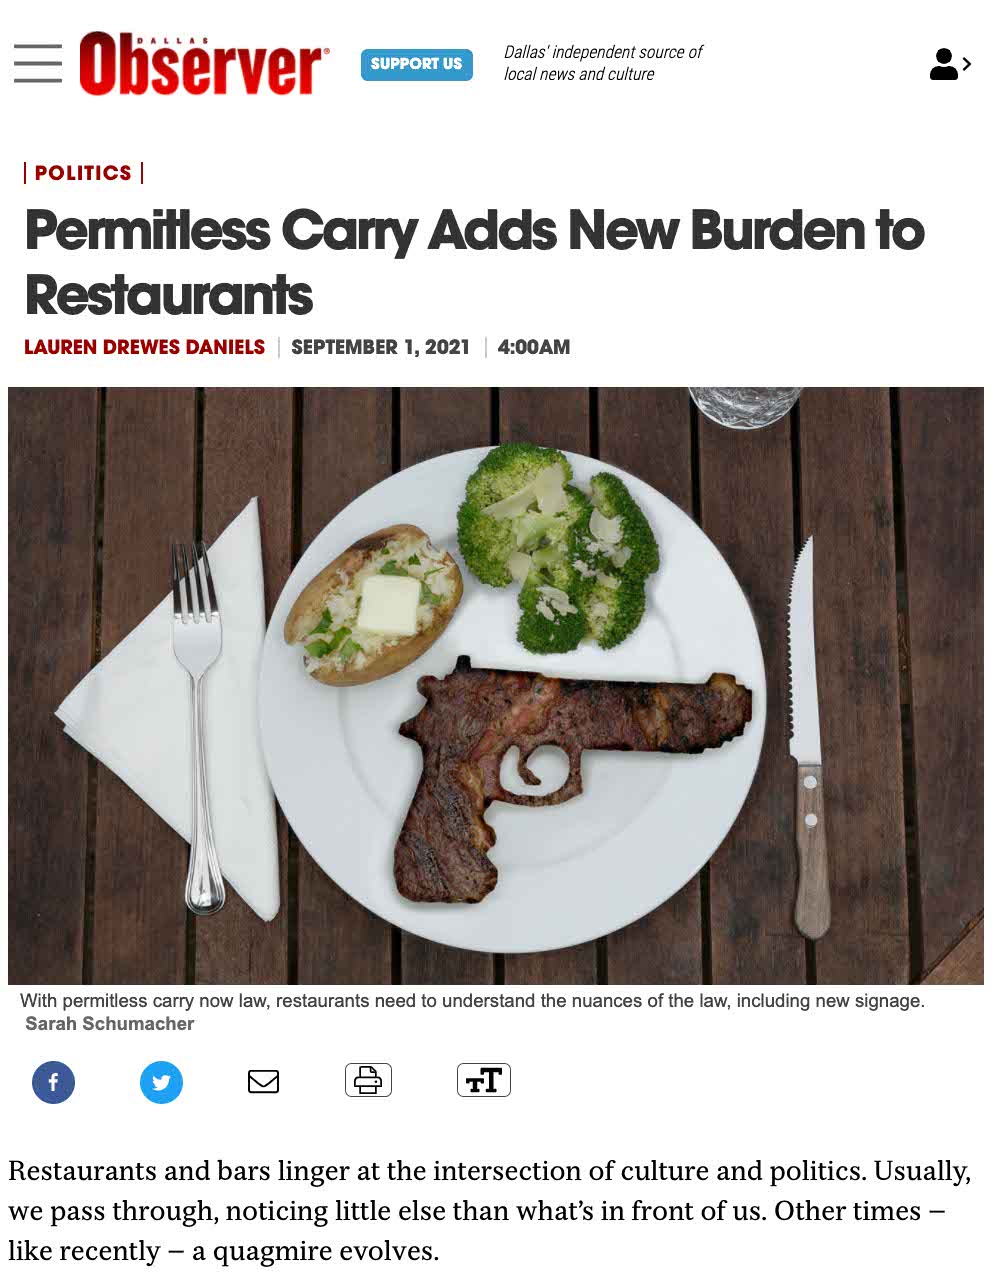 Permitless carry in restaurants leaves restauranteurs responsible for safety